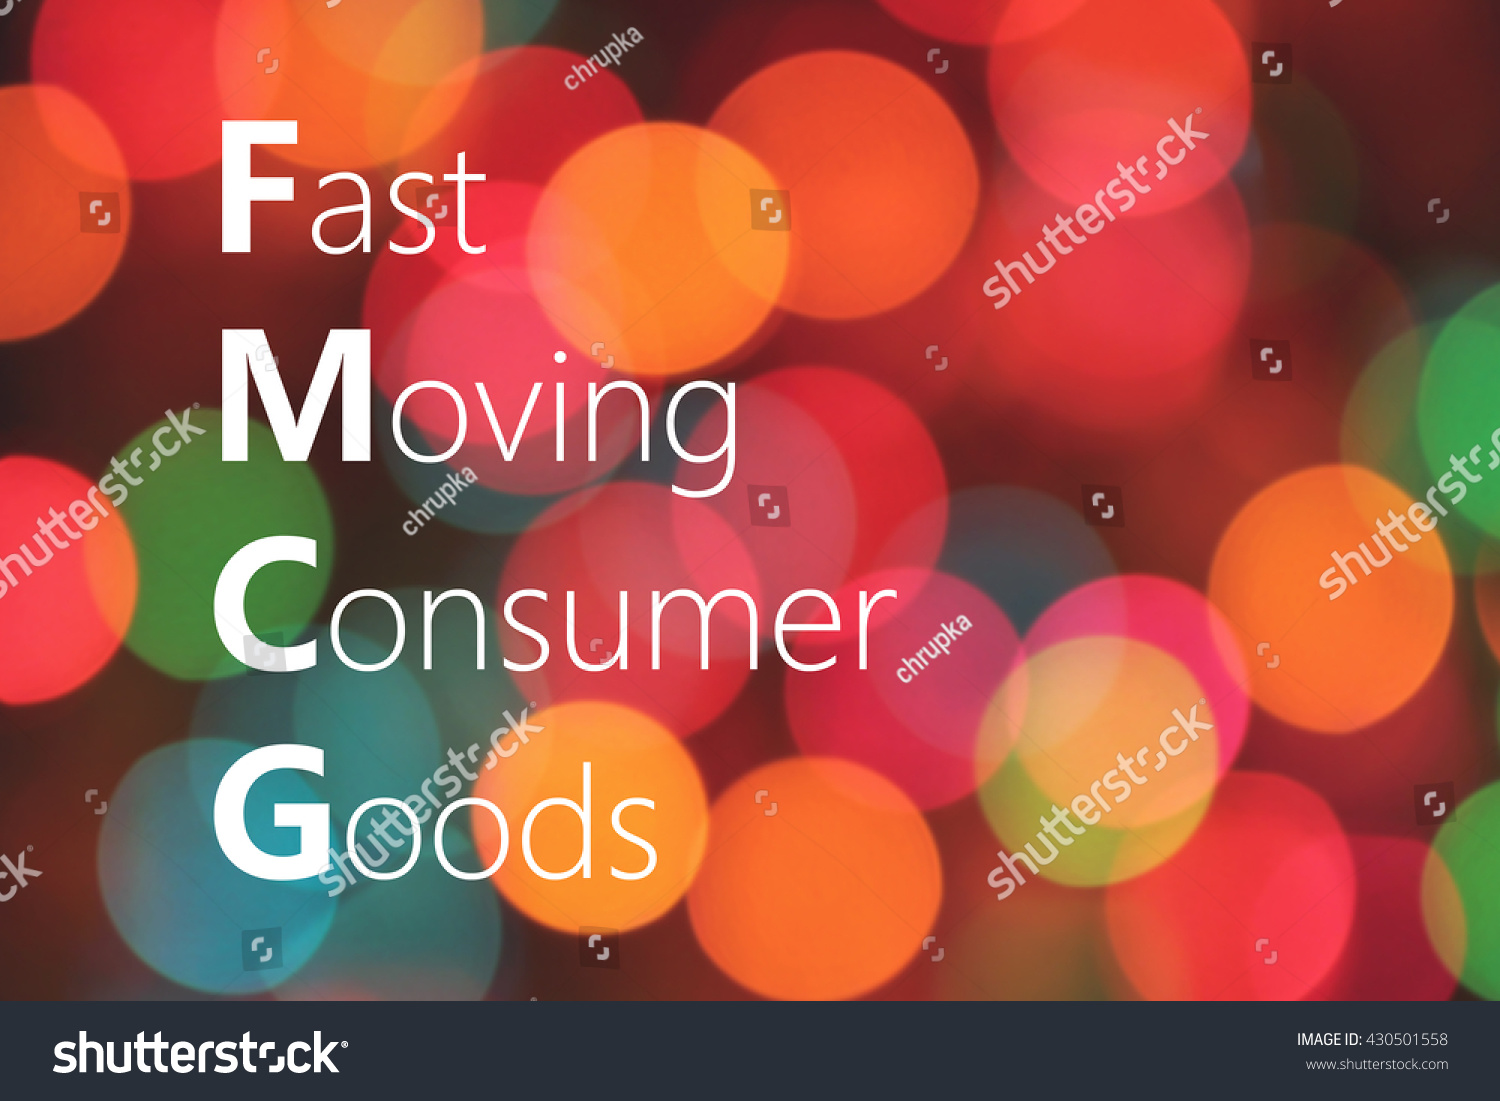 FMCG (Fast Moving Consumer Goods) acronym. business concept #430501558